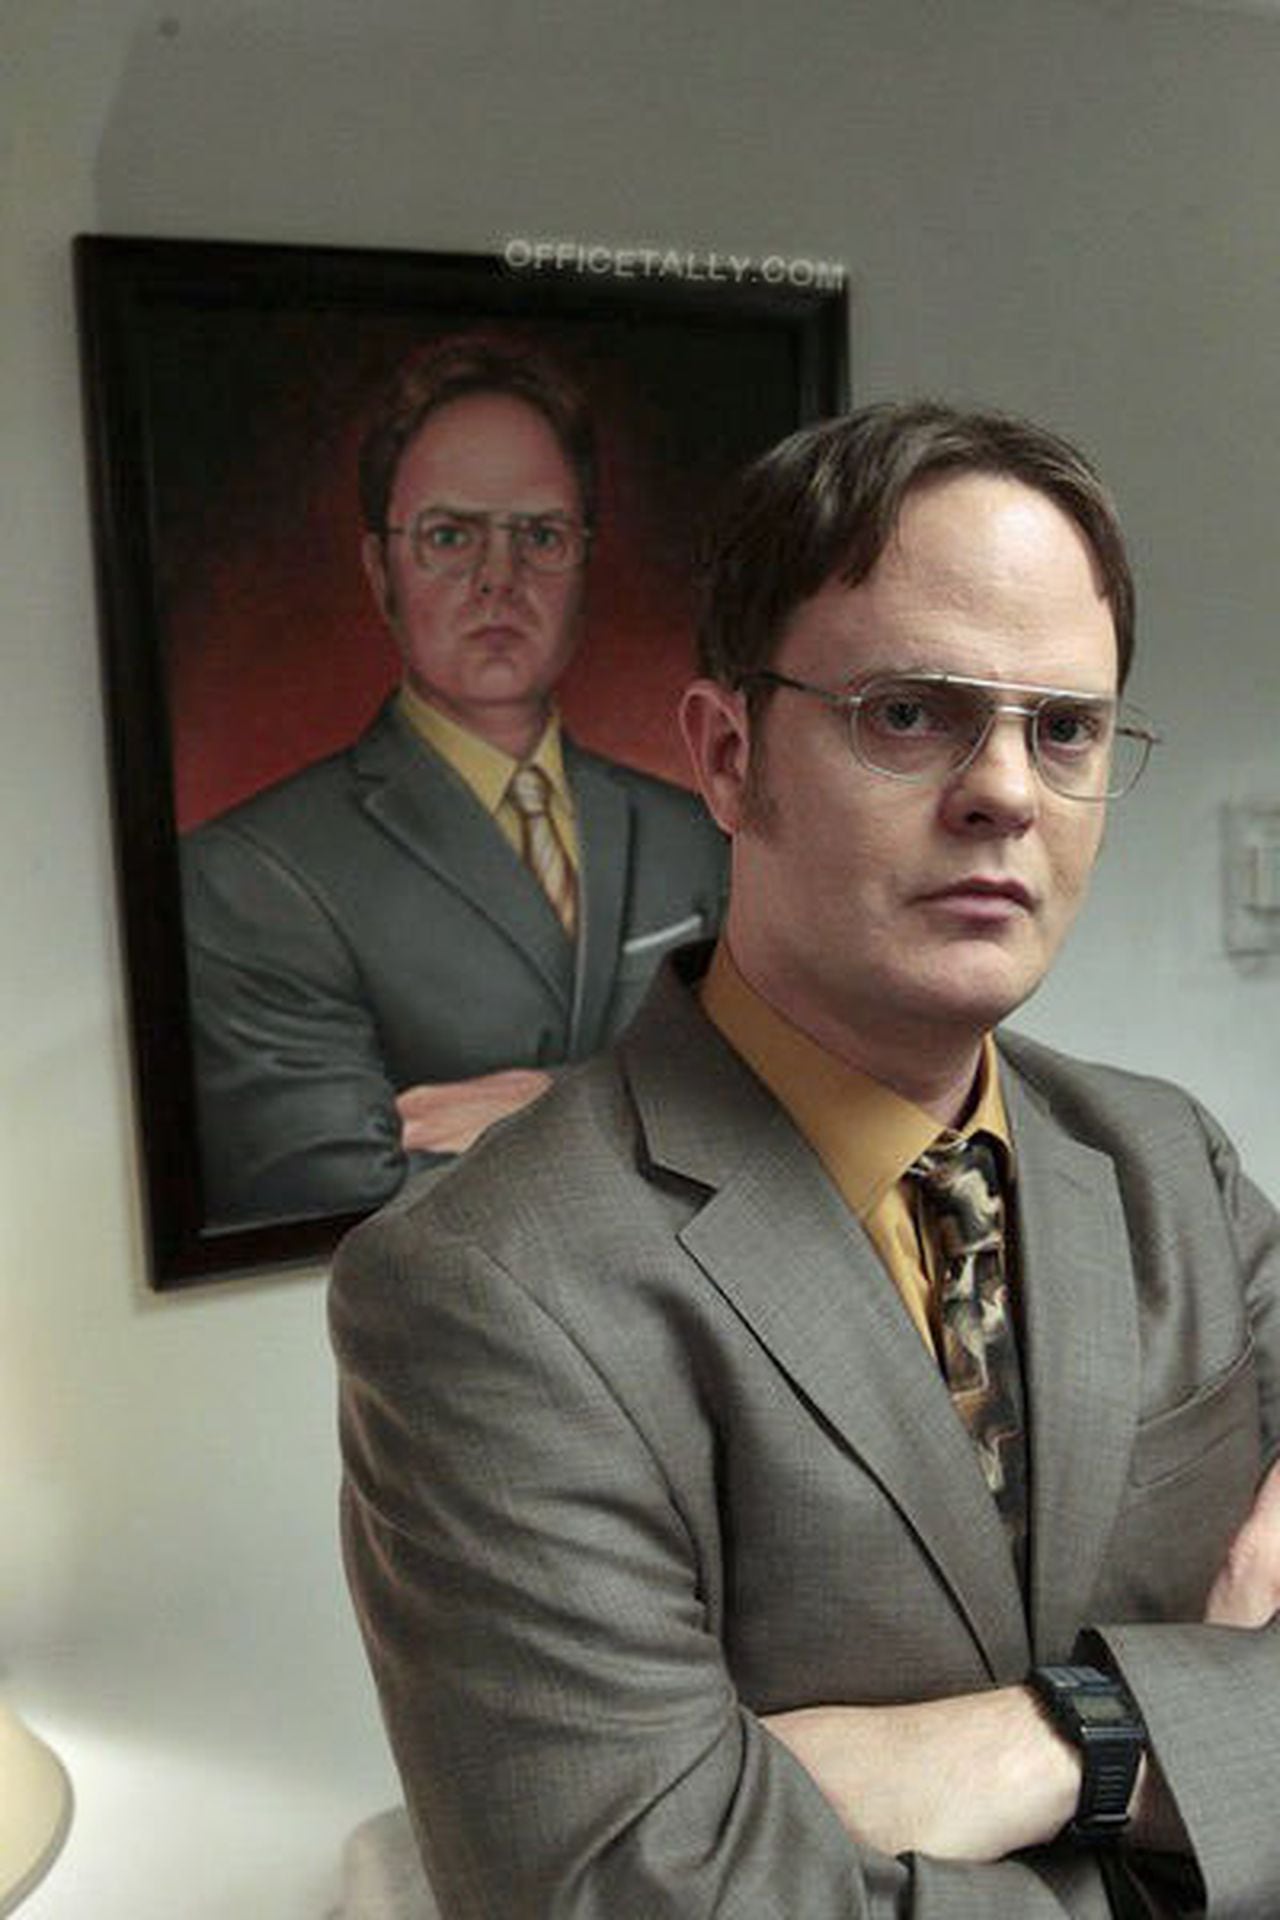 the-office-dwight-k-schrute-acting-manager-6jpg-21db56f6d7d60808.jpg